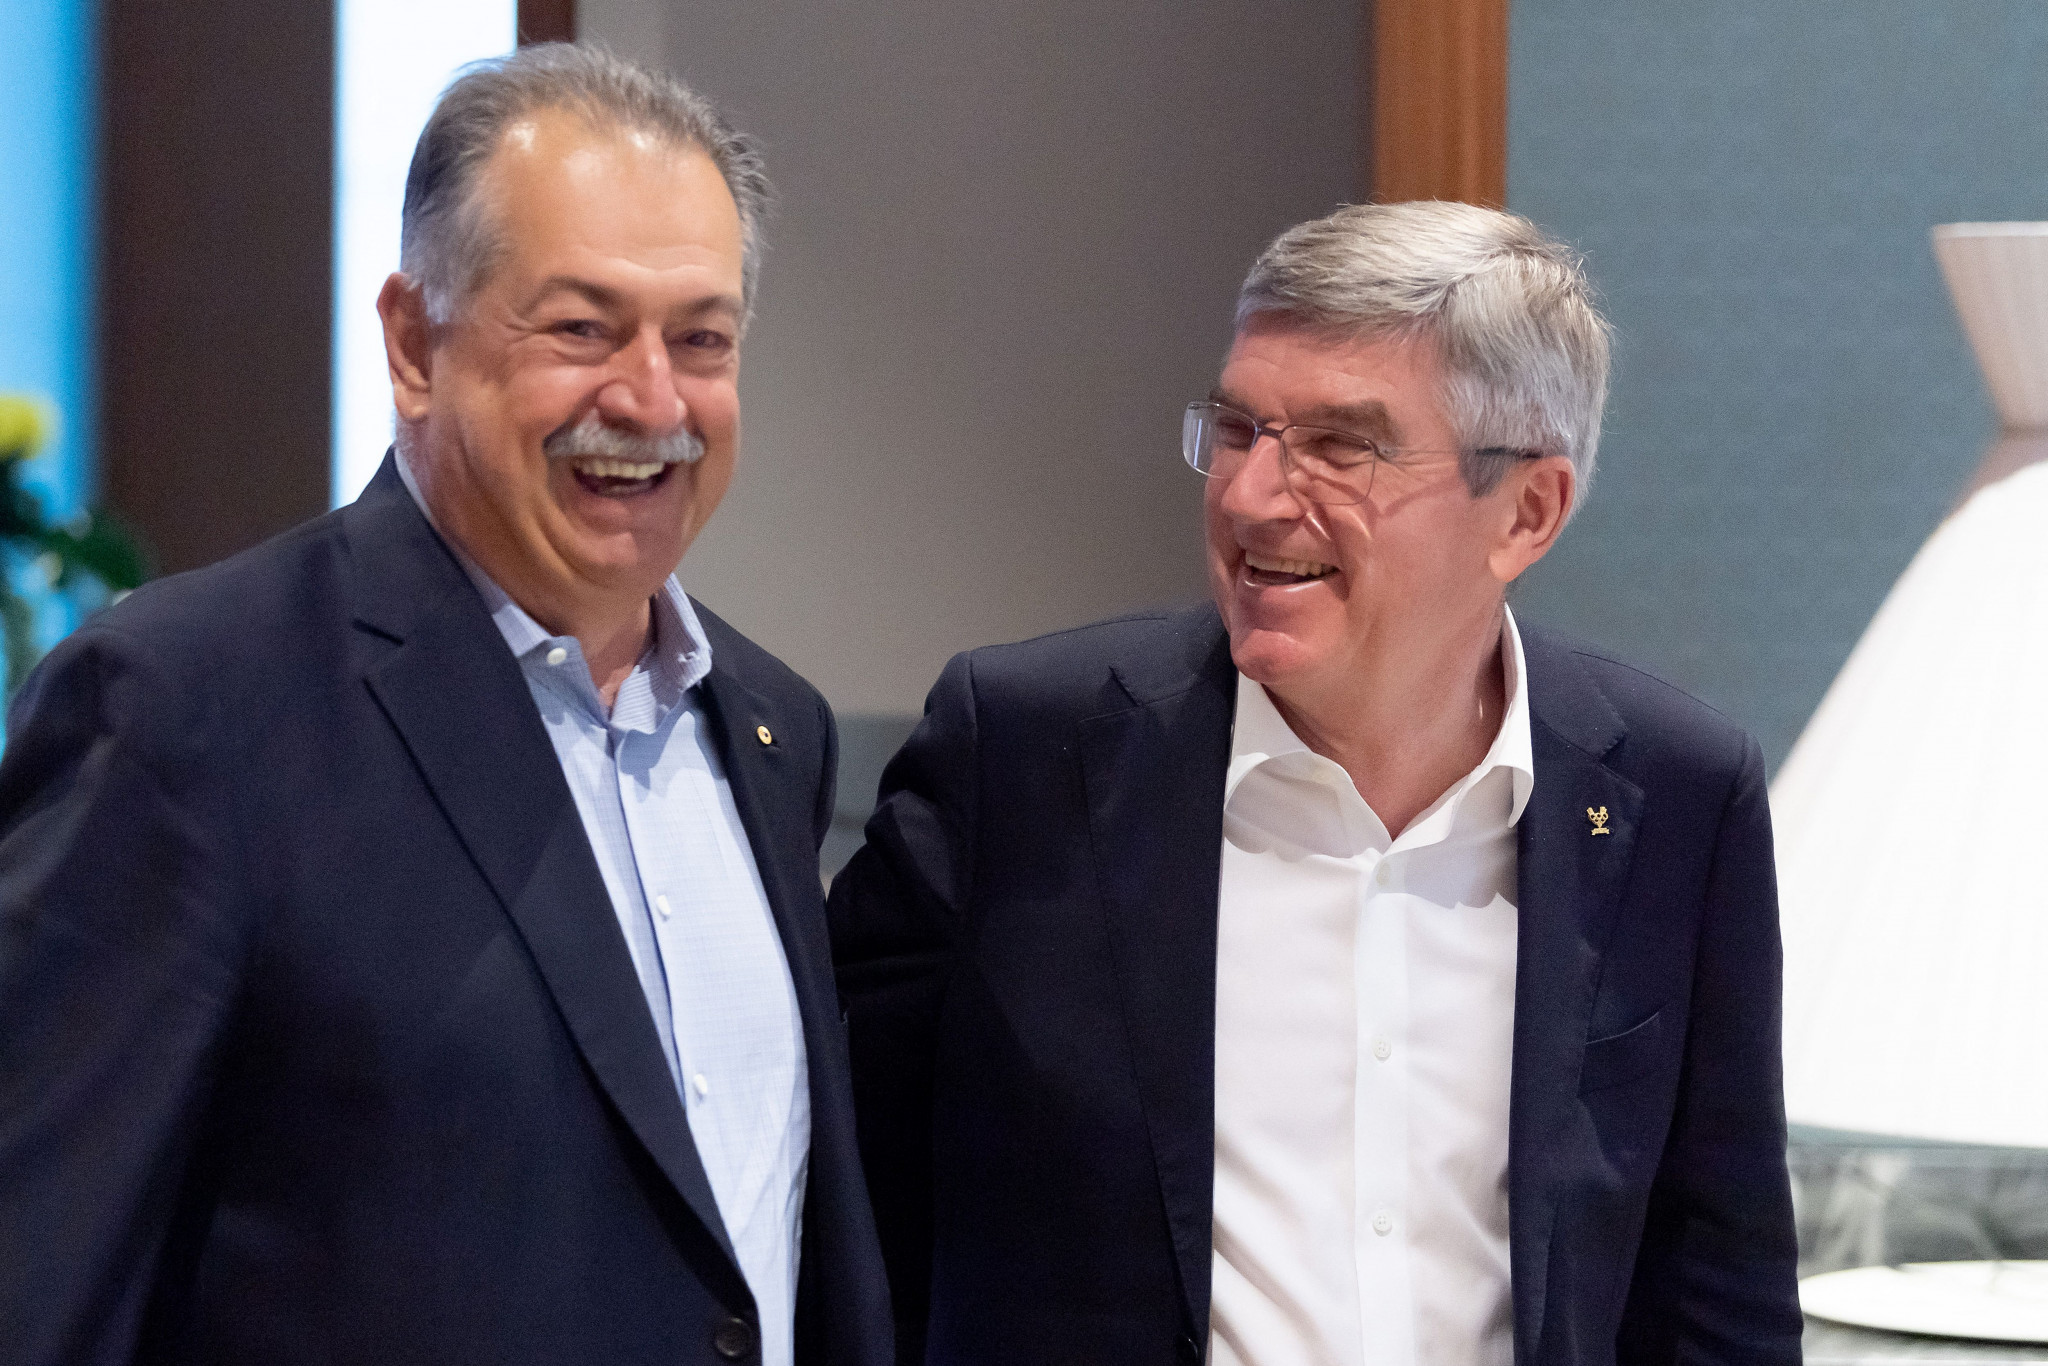 Brisbane 2032 President Andrew Liveris, left, is aiming to deliver on the commitment to stage "climate-positive" Olympic and Paralympic Games ©Getty Images